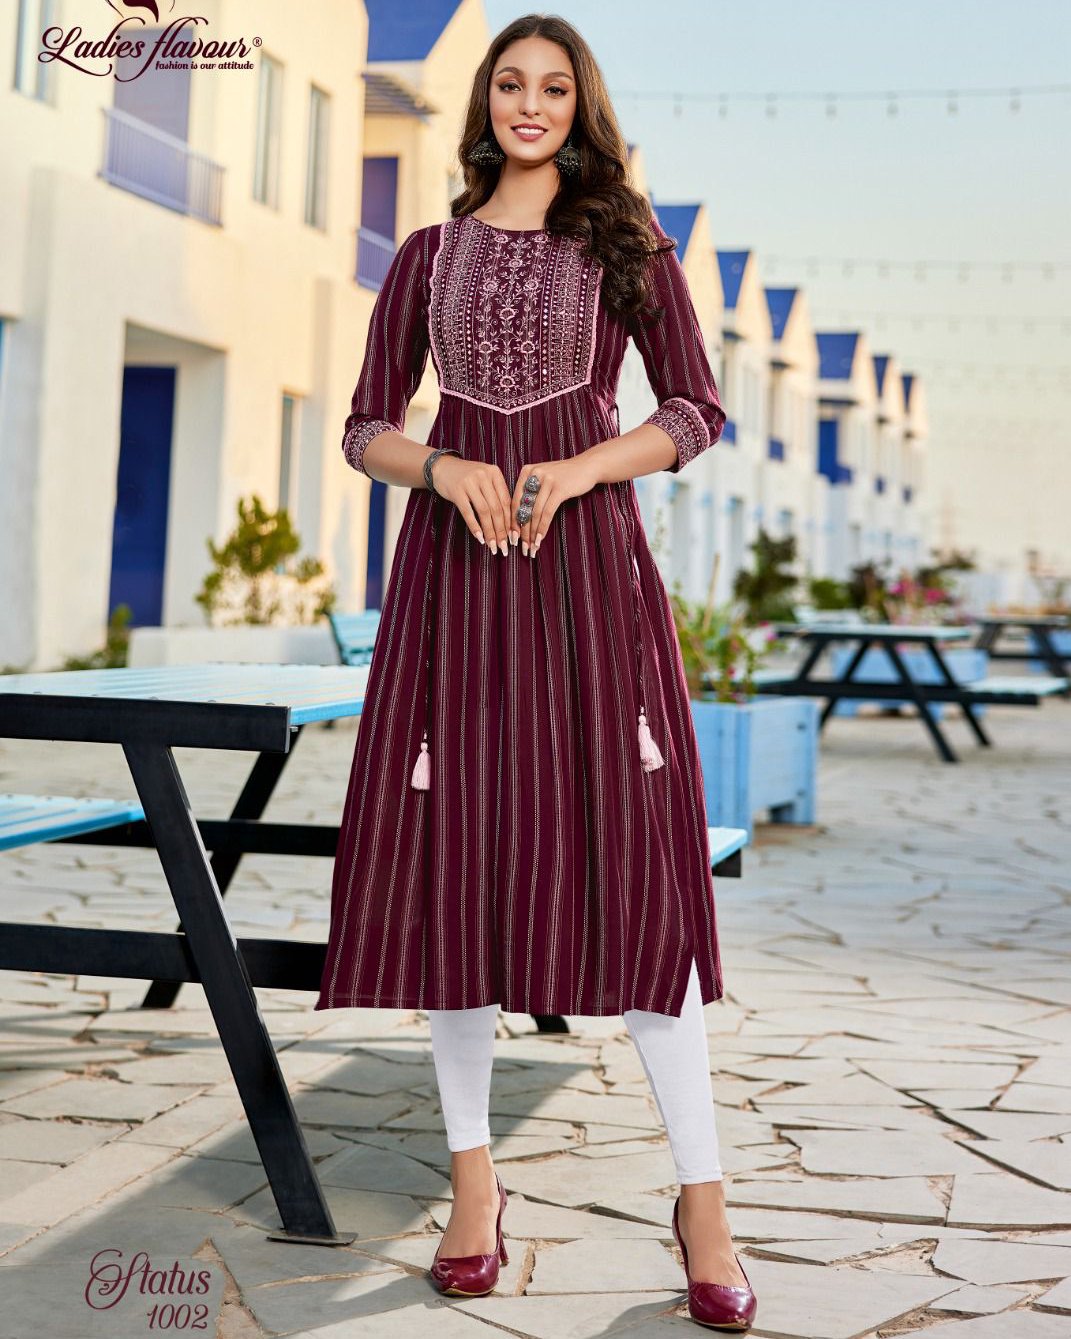 Kurtas | Simple dresses, Casual indian fashion, Indian designer outfits